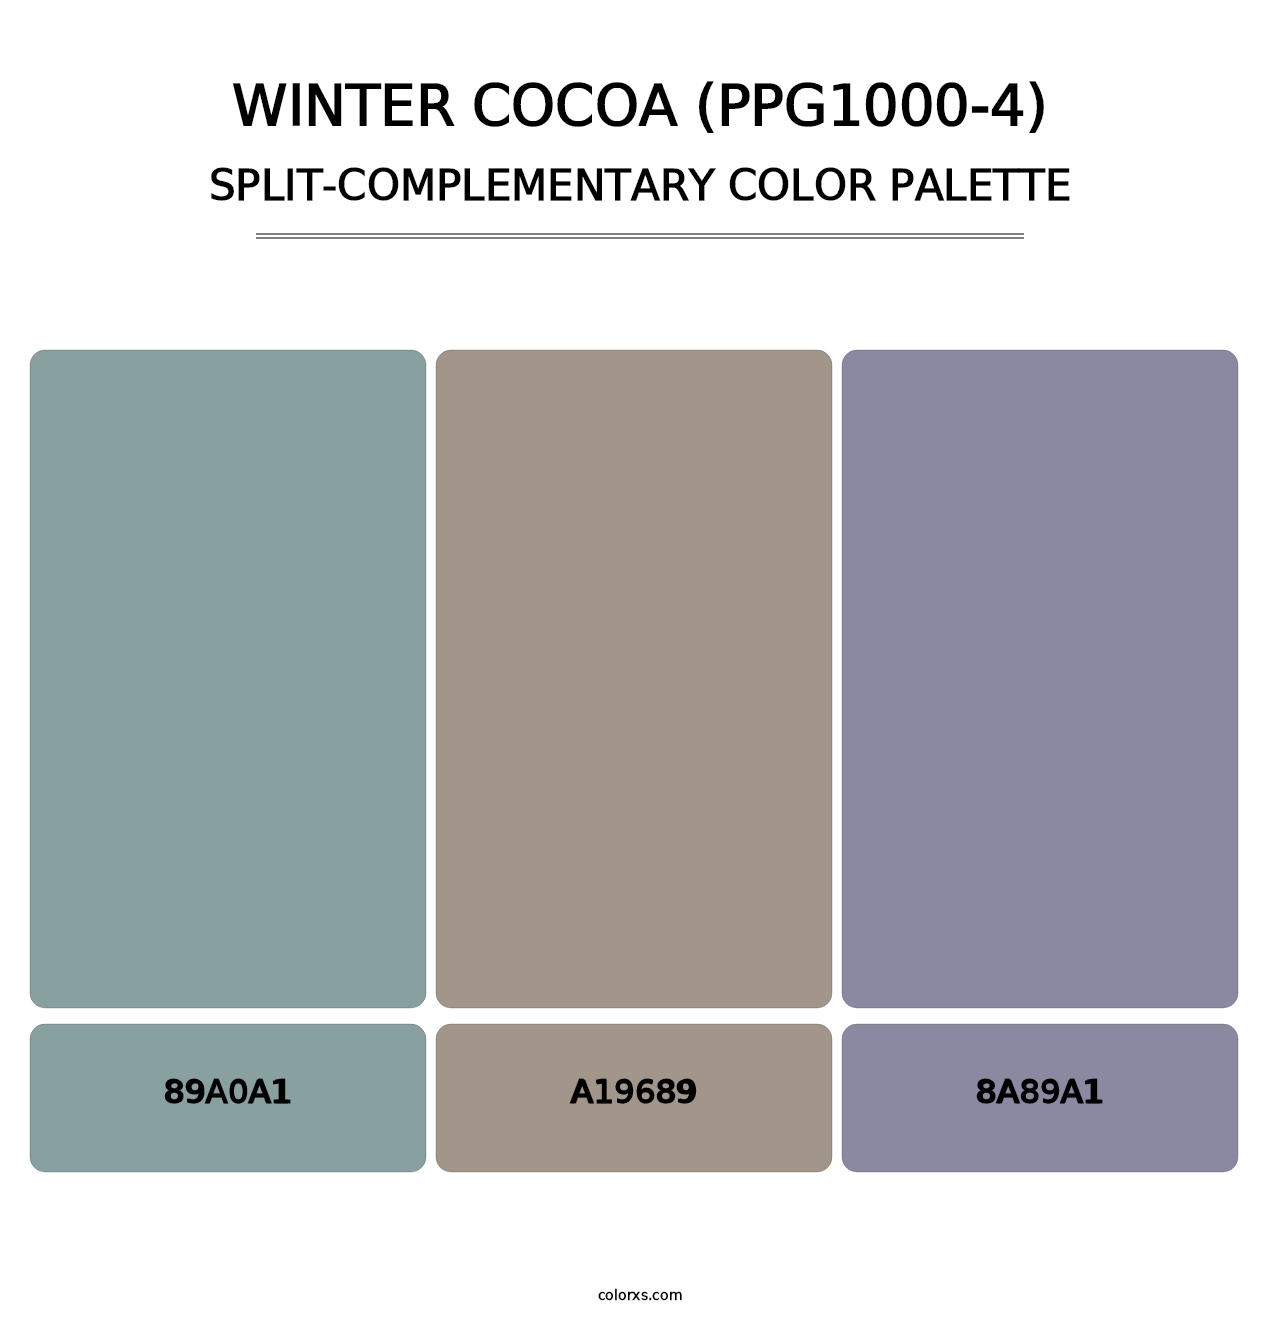 Winter Cocoa (PPG1000-4) - Split-Complementary Color Palette